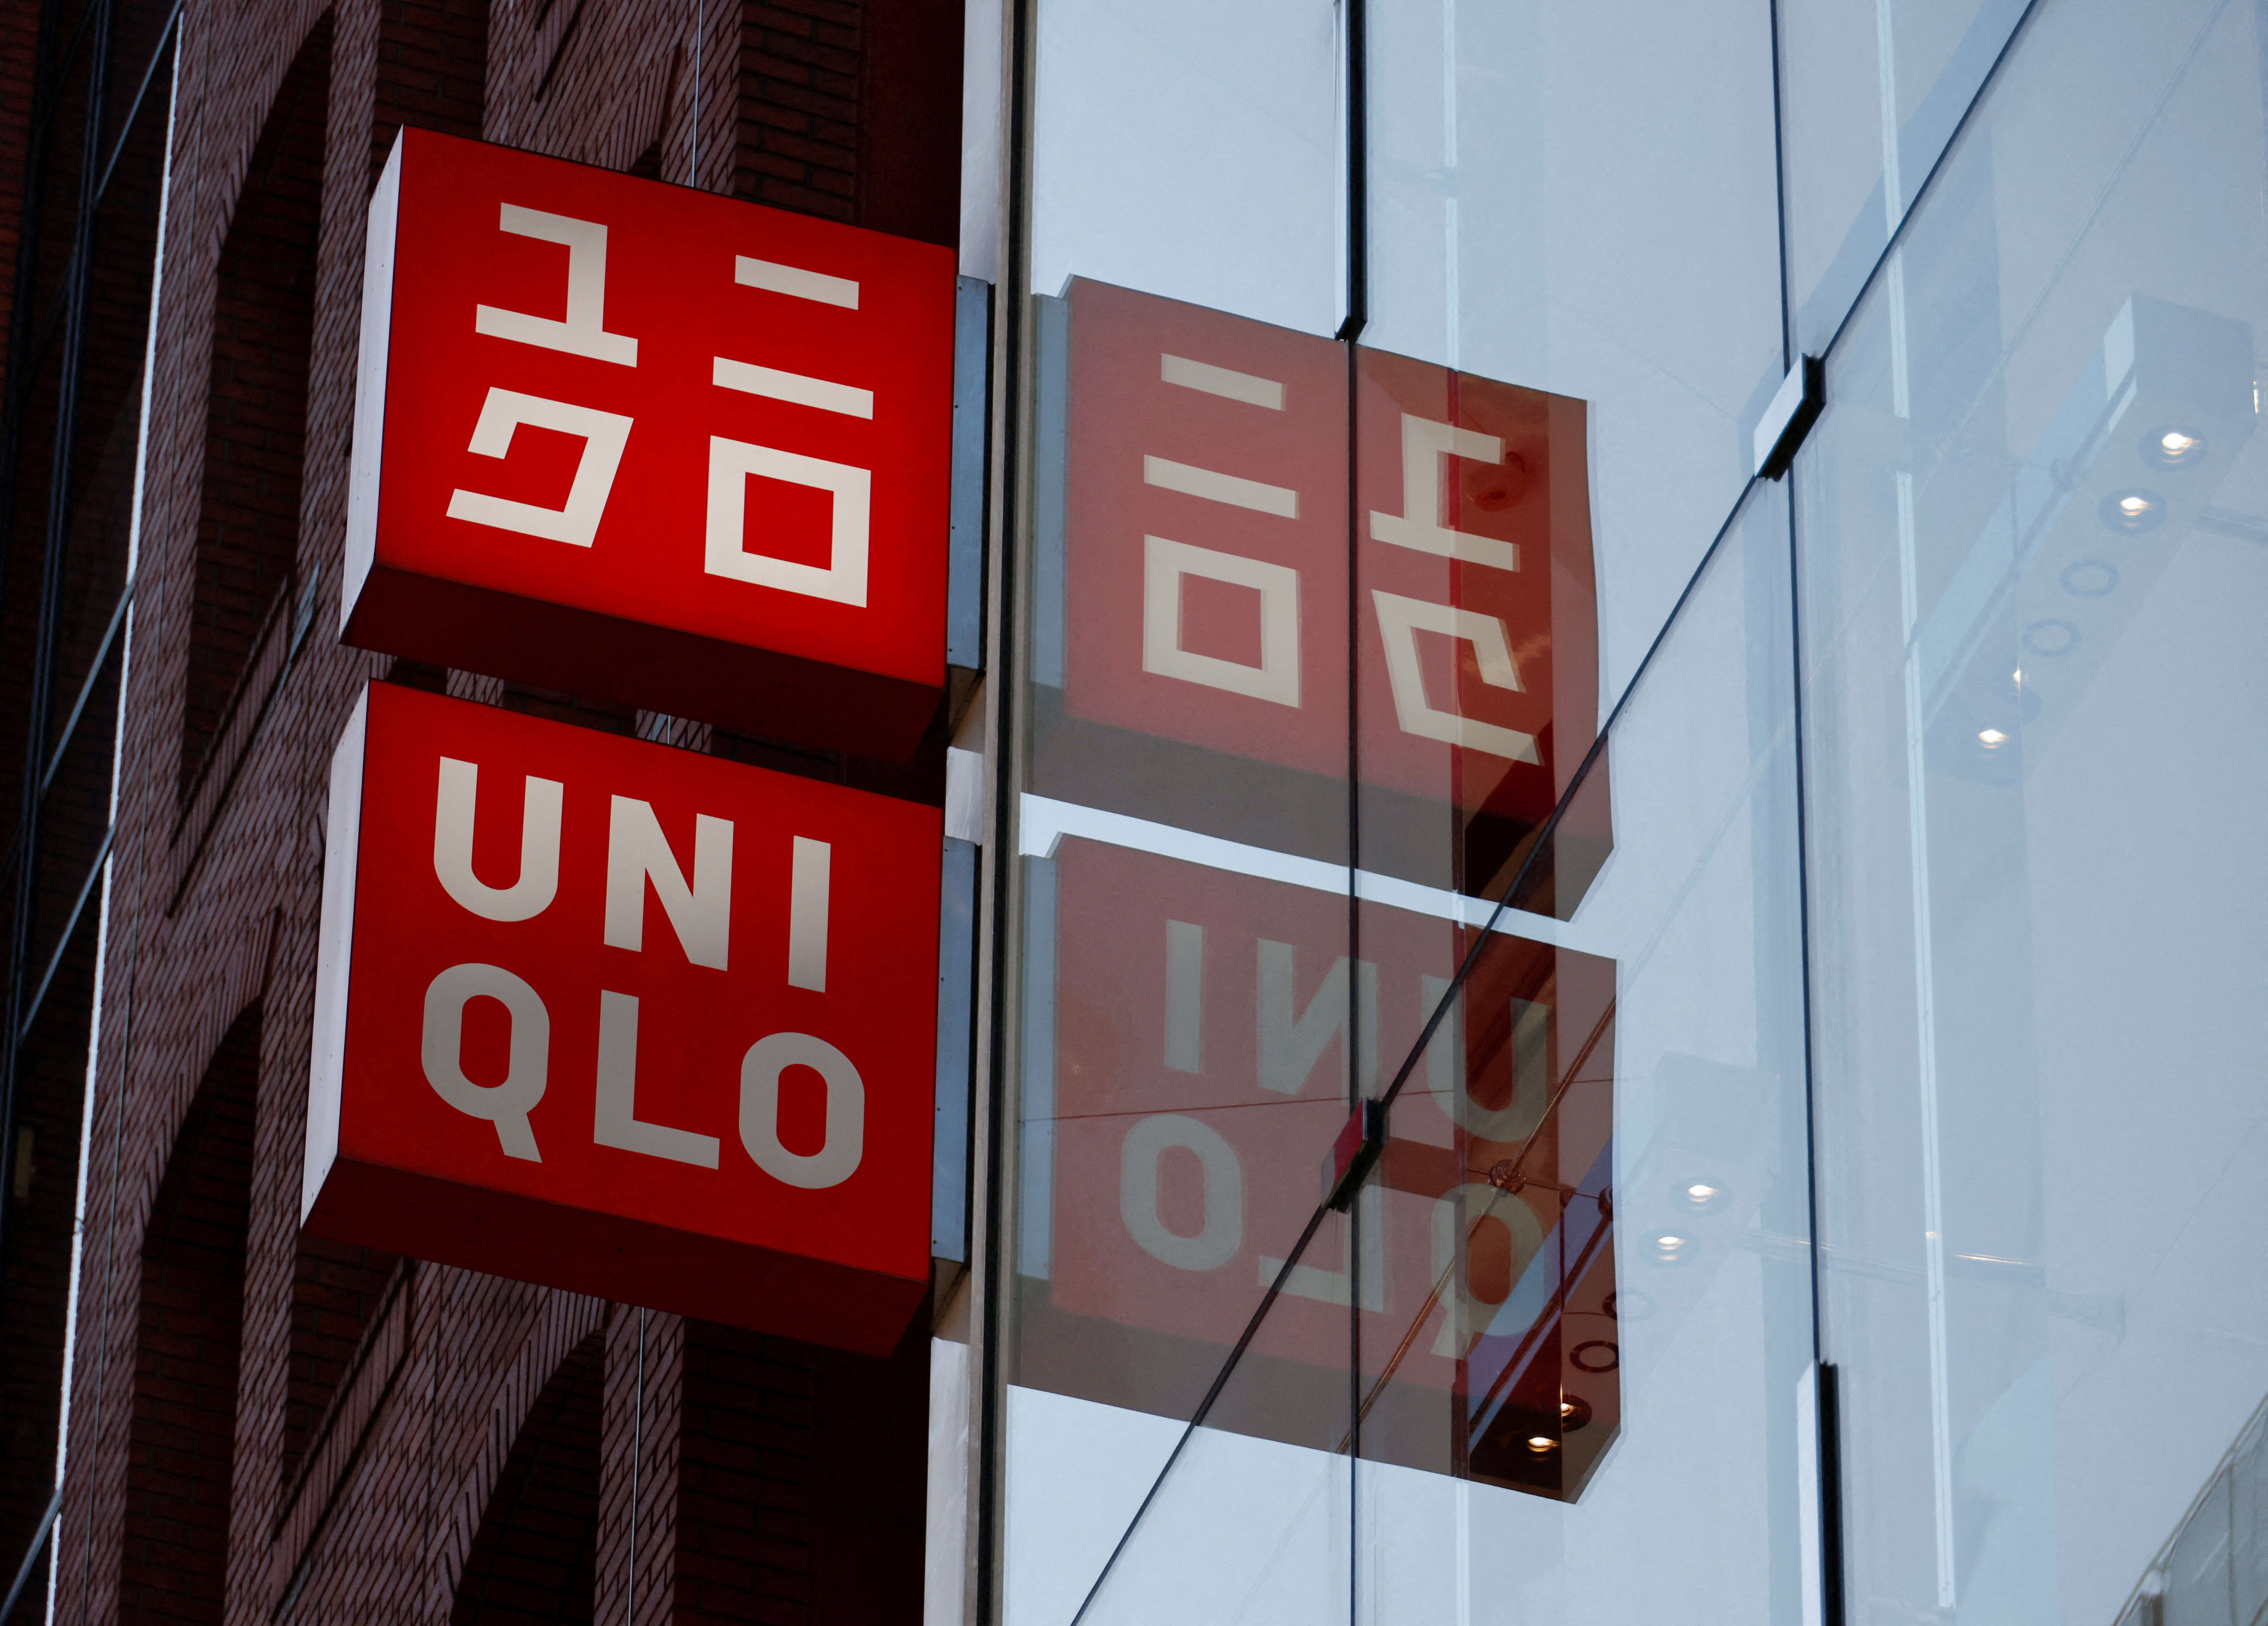 China to Have More Uniqlo Stores Than Japan by 2020